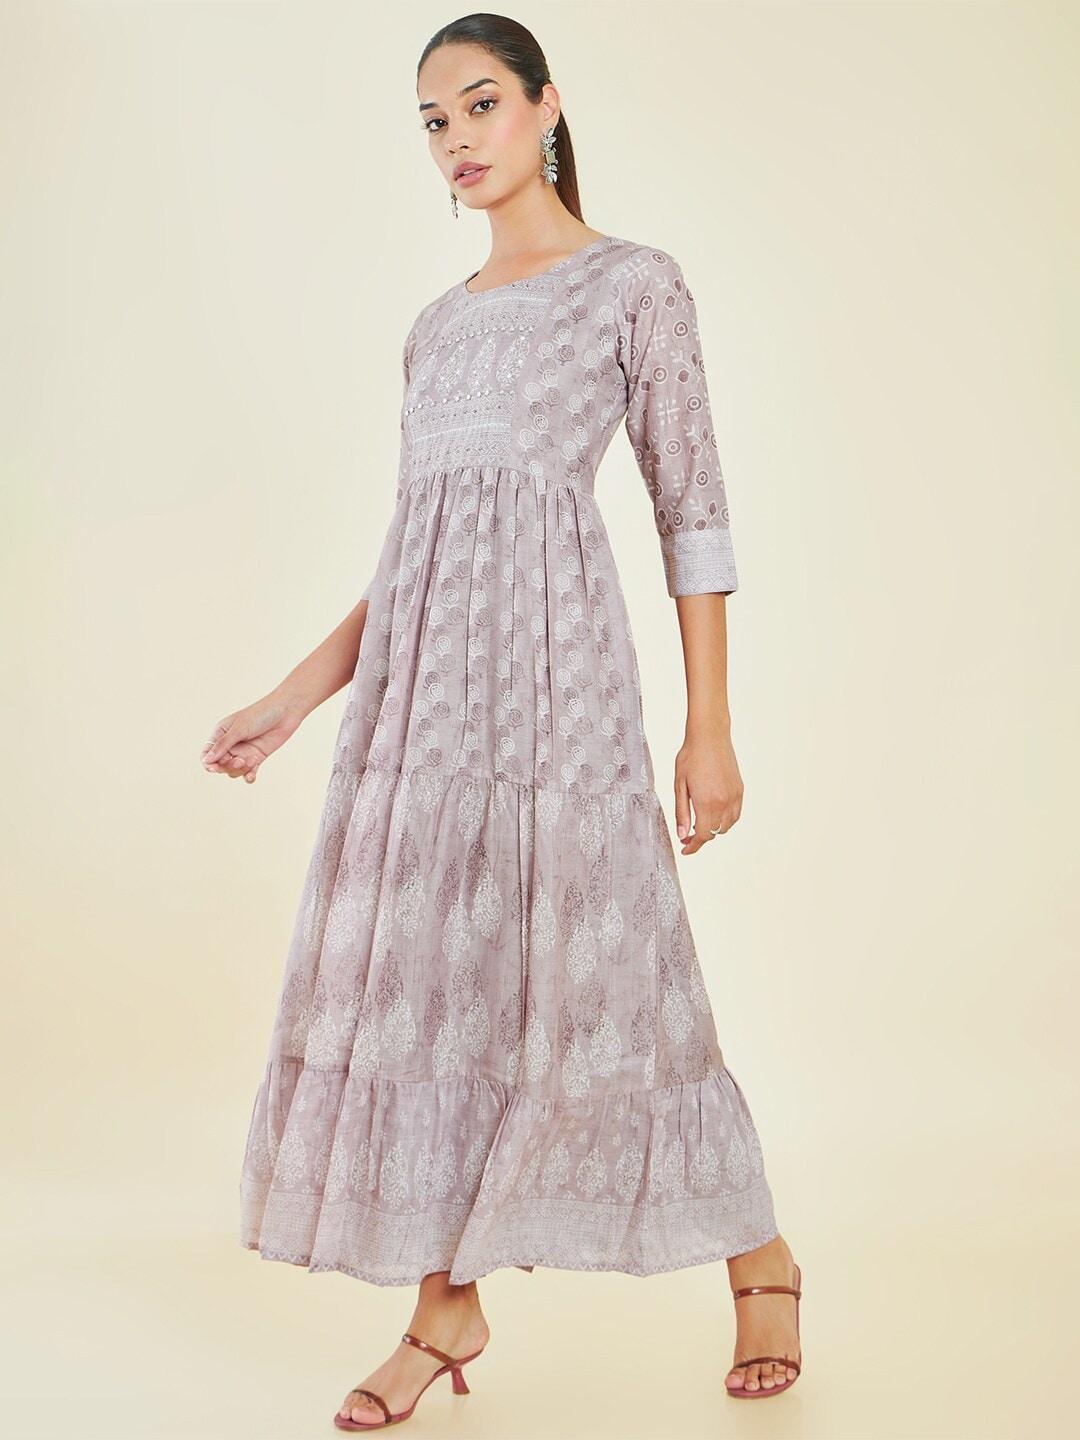 soch-grey-ethnic-motif-printed-embellished-tiered-fit-&-flare-maxi-ethnic-dress